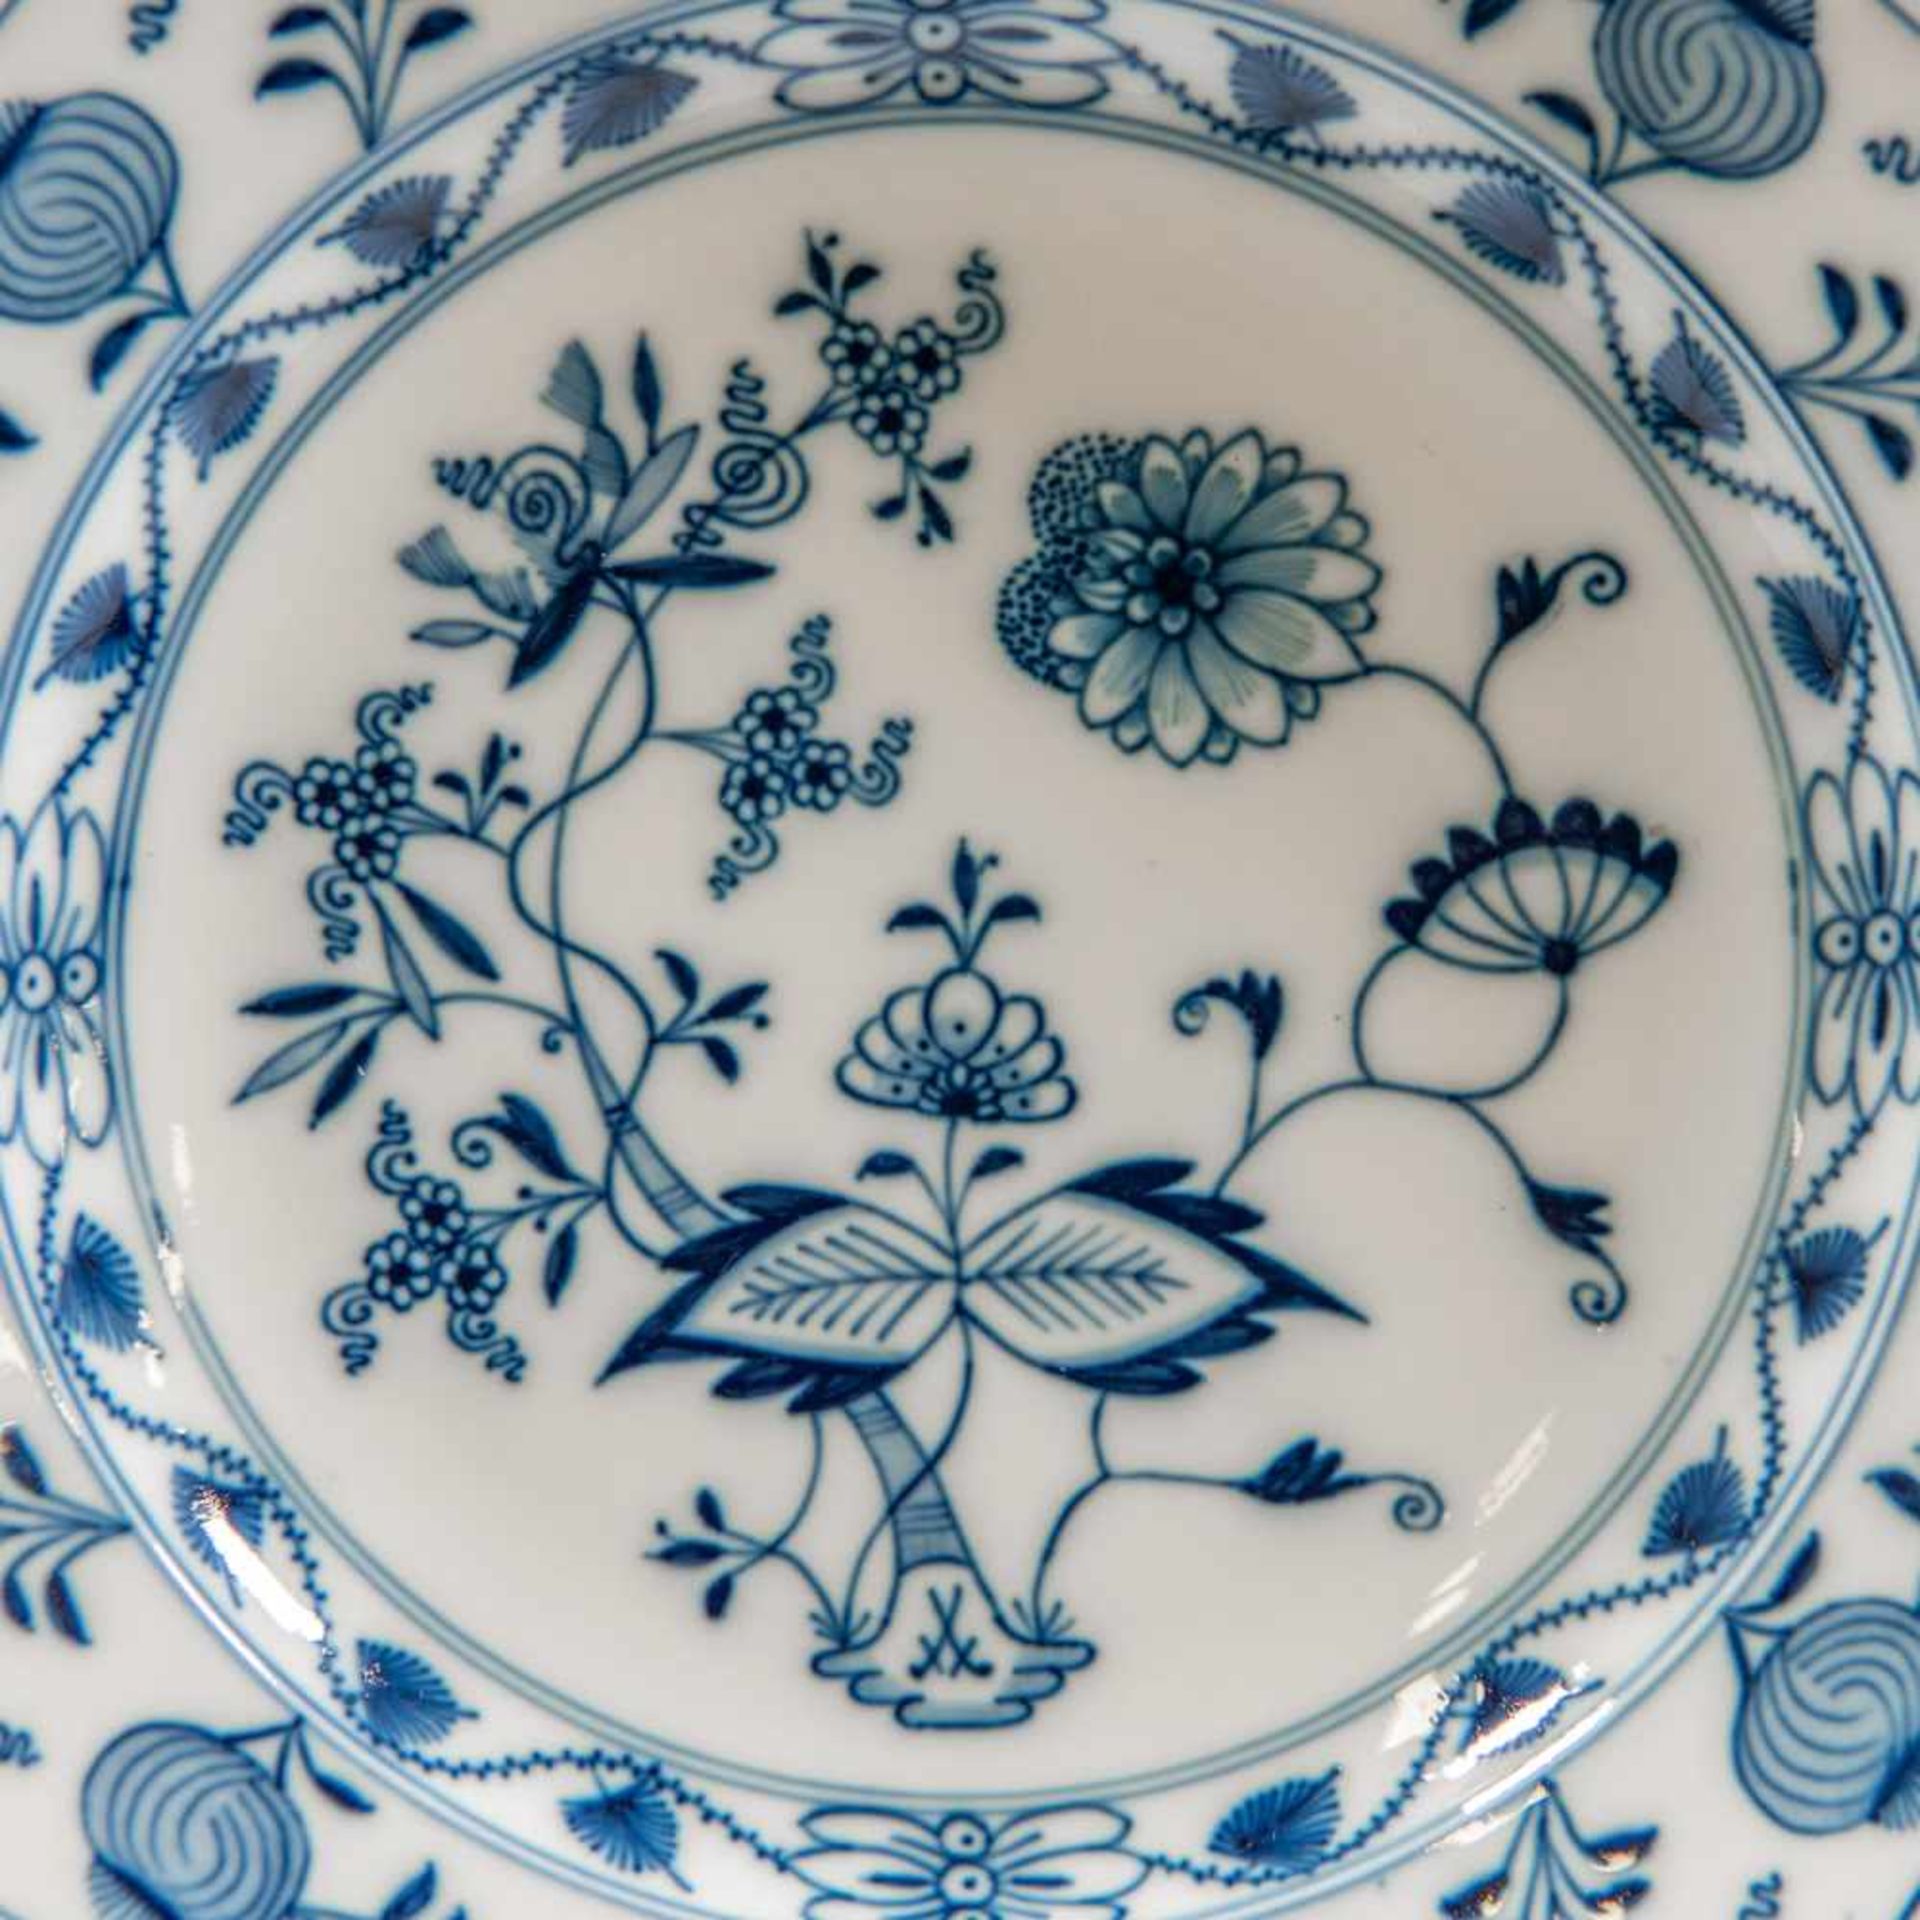 Collection of 12 Meissen porselein plates, marked with crossed swords, Meissen zwiebelmuster - Image 3 of 4